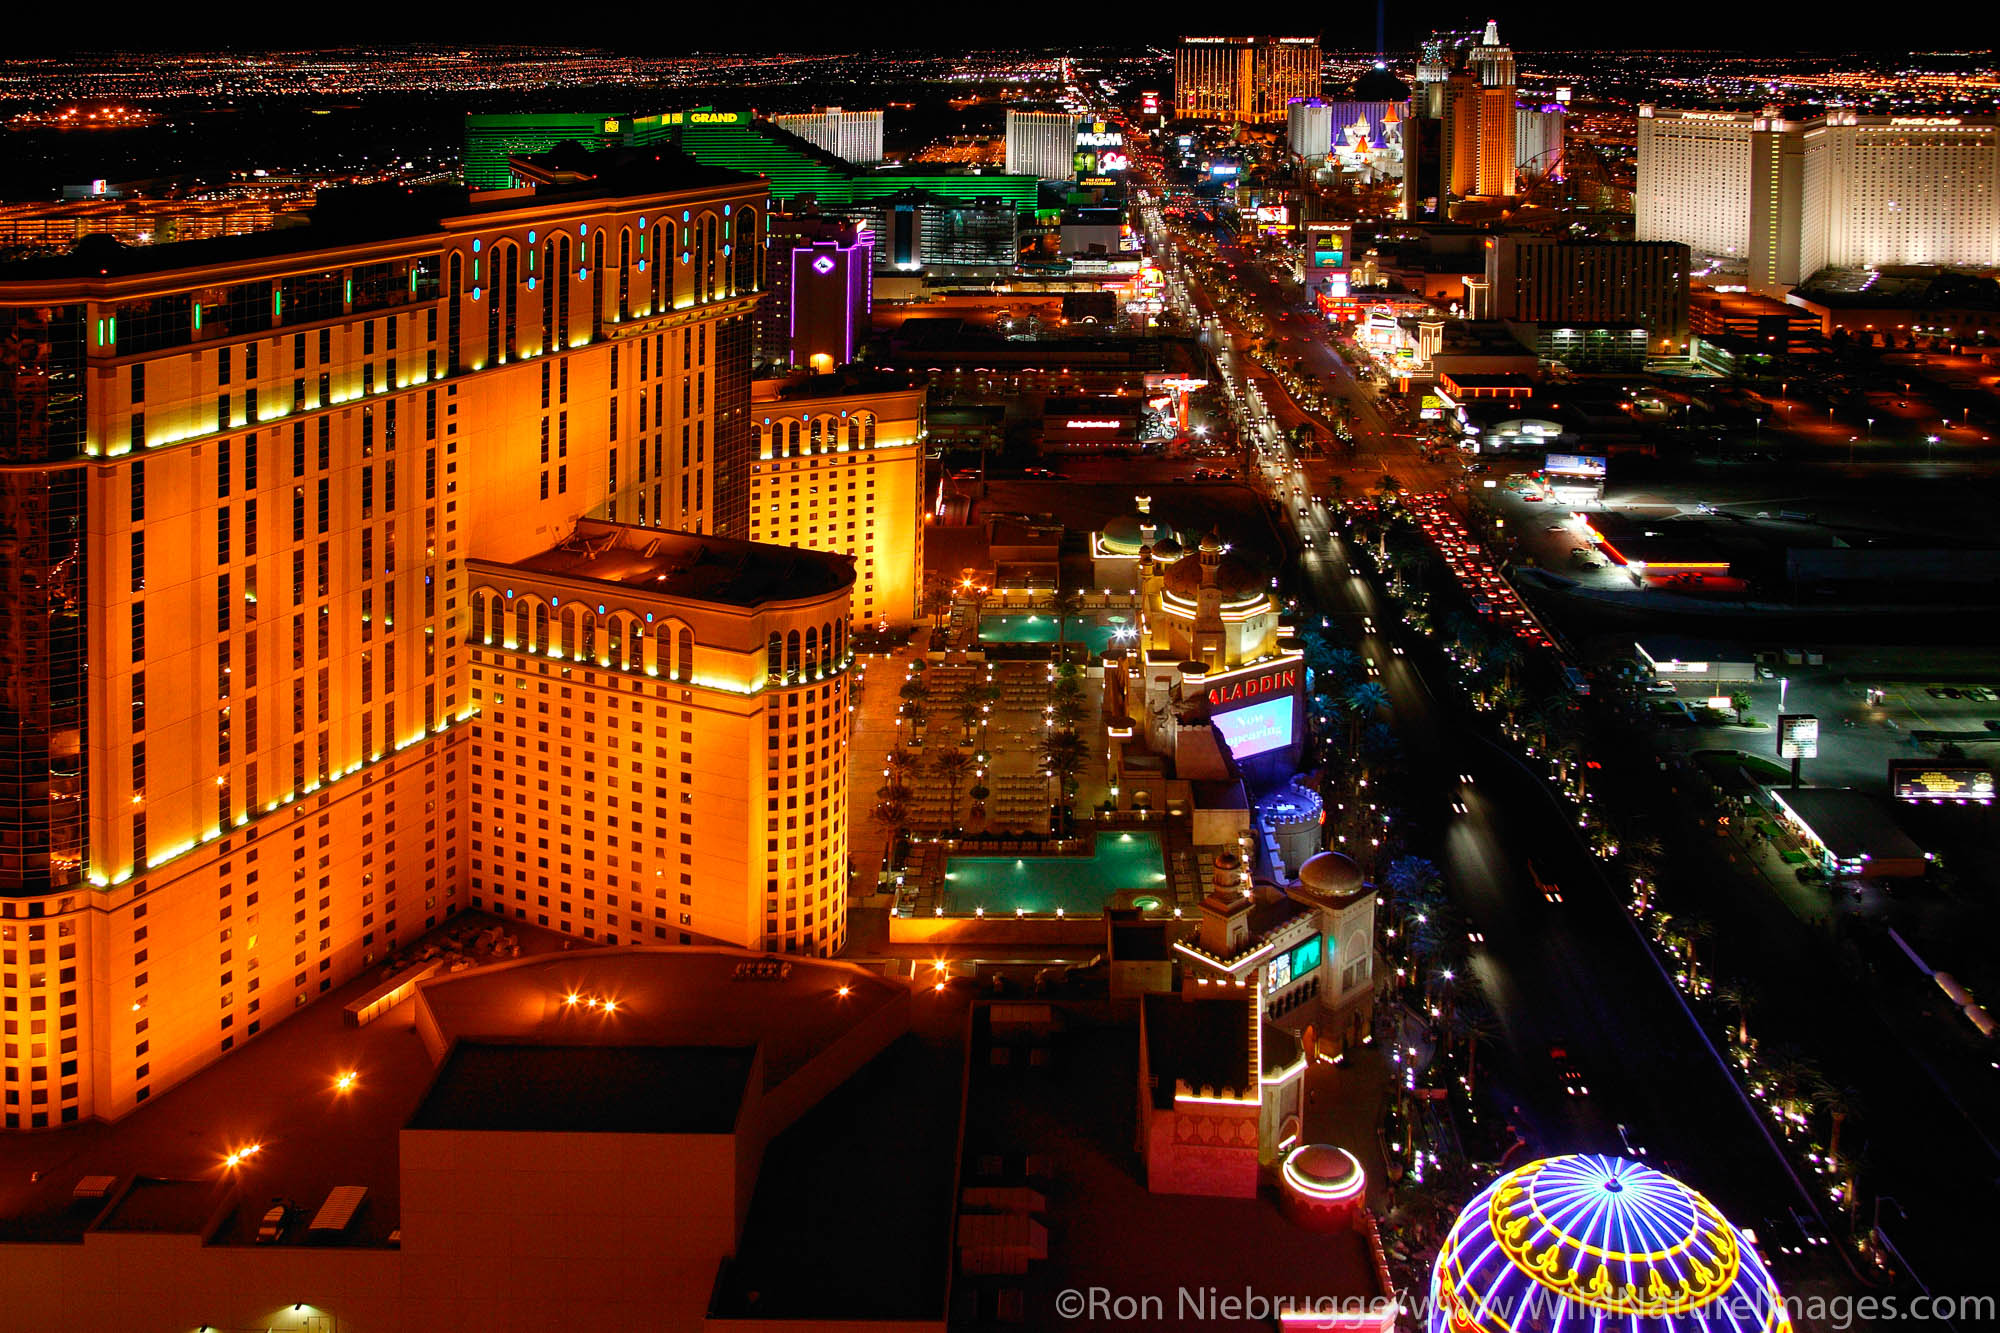 The view of the strip from the Eiffel Tower at the Paris resort hotel and casino in Las Vegas, Nevada.